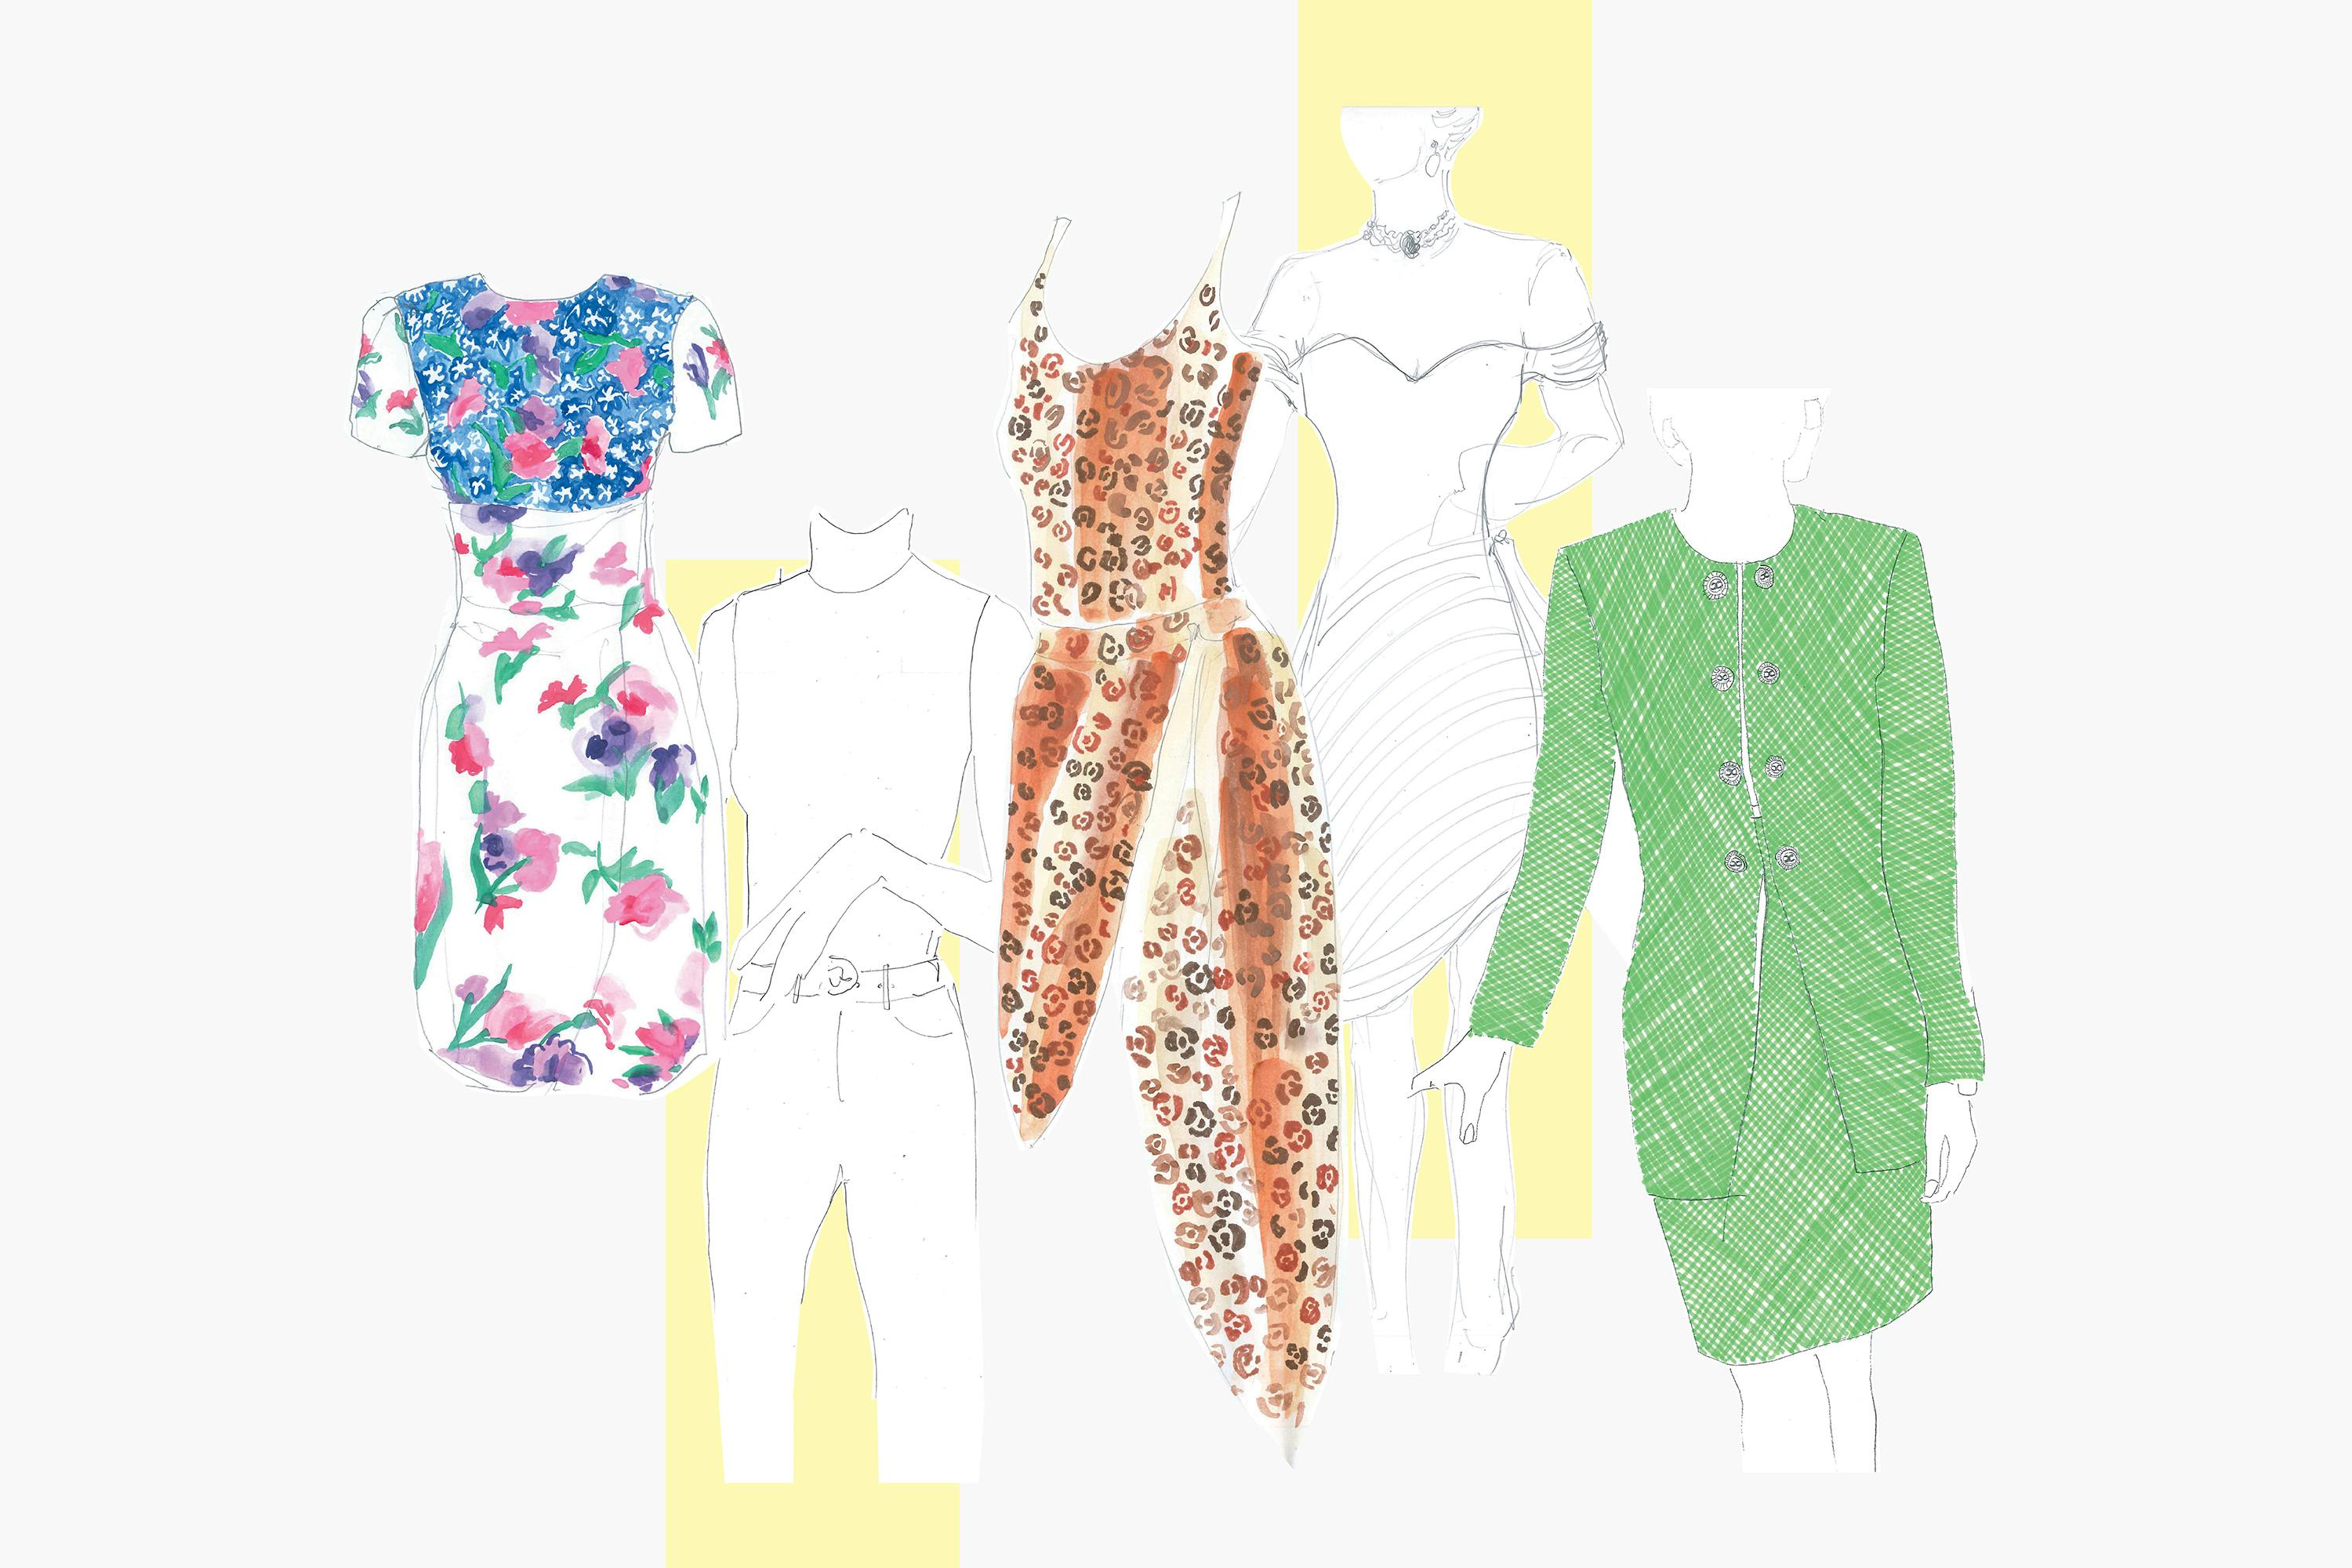 Sketches of some of the pieces of Diana’s iconic wardrobe in The Crown. From left to right: a flowered dress, a cheetah print swimsuit and sarong, and a green suit set.